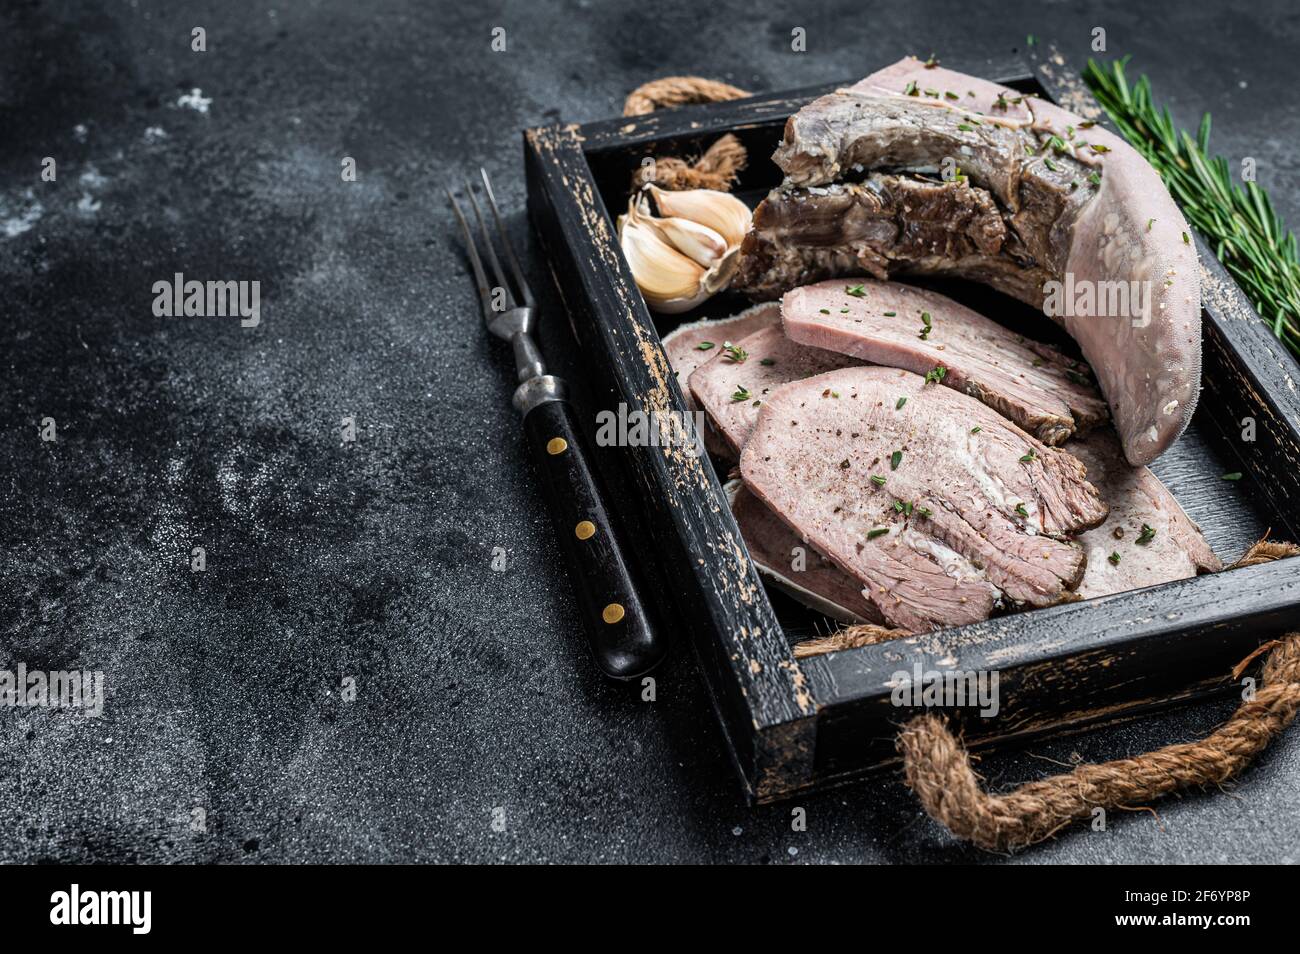 Cooked Boiled veal or beef tongue sliced in a wooden tray. Black background. Top view. Copy space Stock Photo